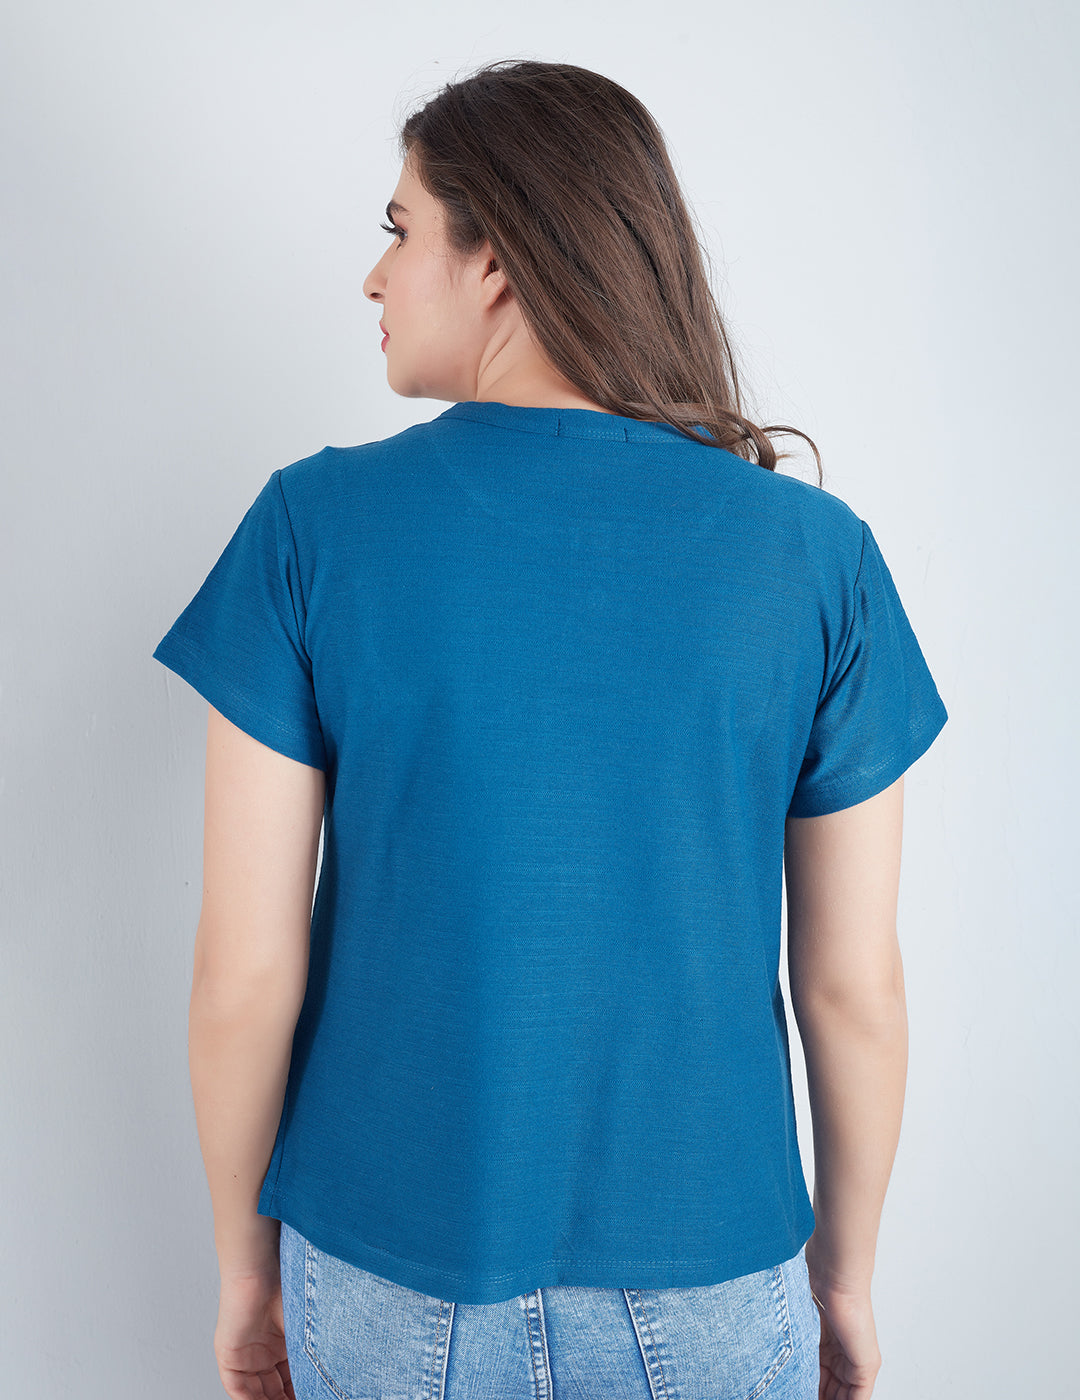 Comfortable Plain Short T-shirts For Women - Teal Blue At Online